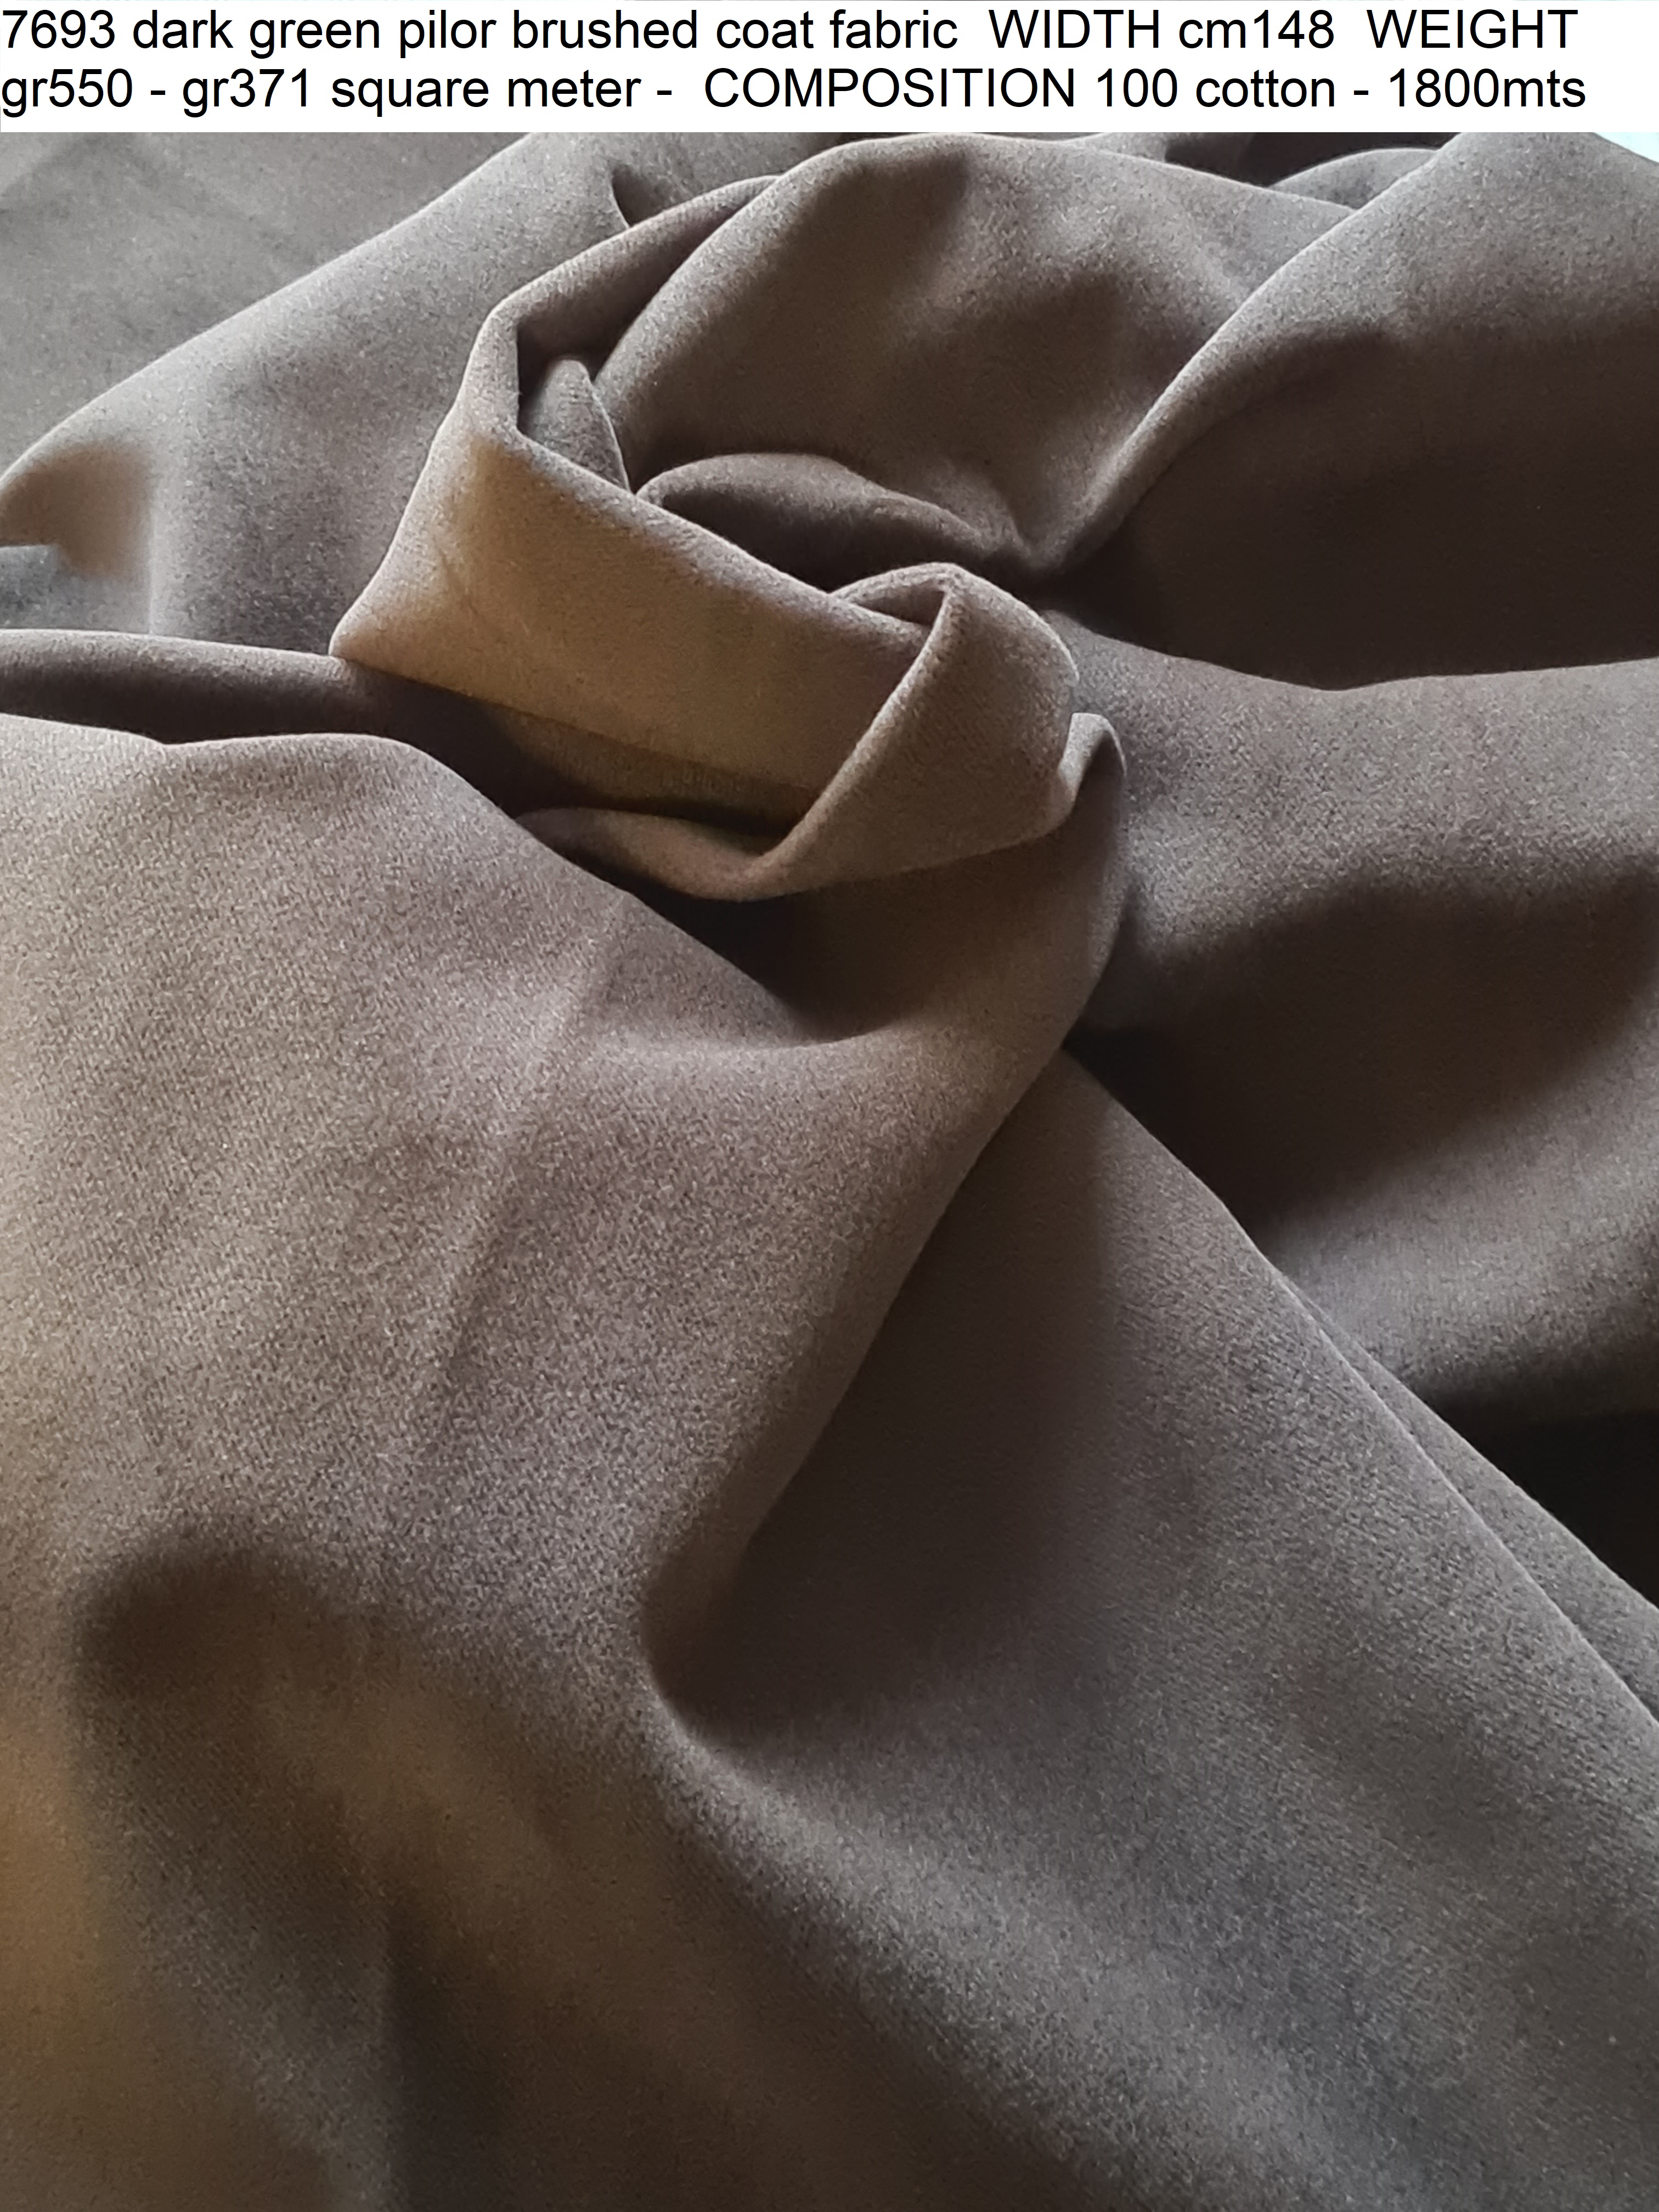 7693 dark green pilor brushed coat fabric WIDTH cm148 WEIGHT gr550 - gr371 square meter - COMPOSITION 100 cotton - 1800mts